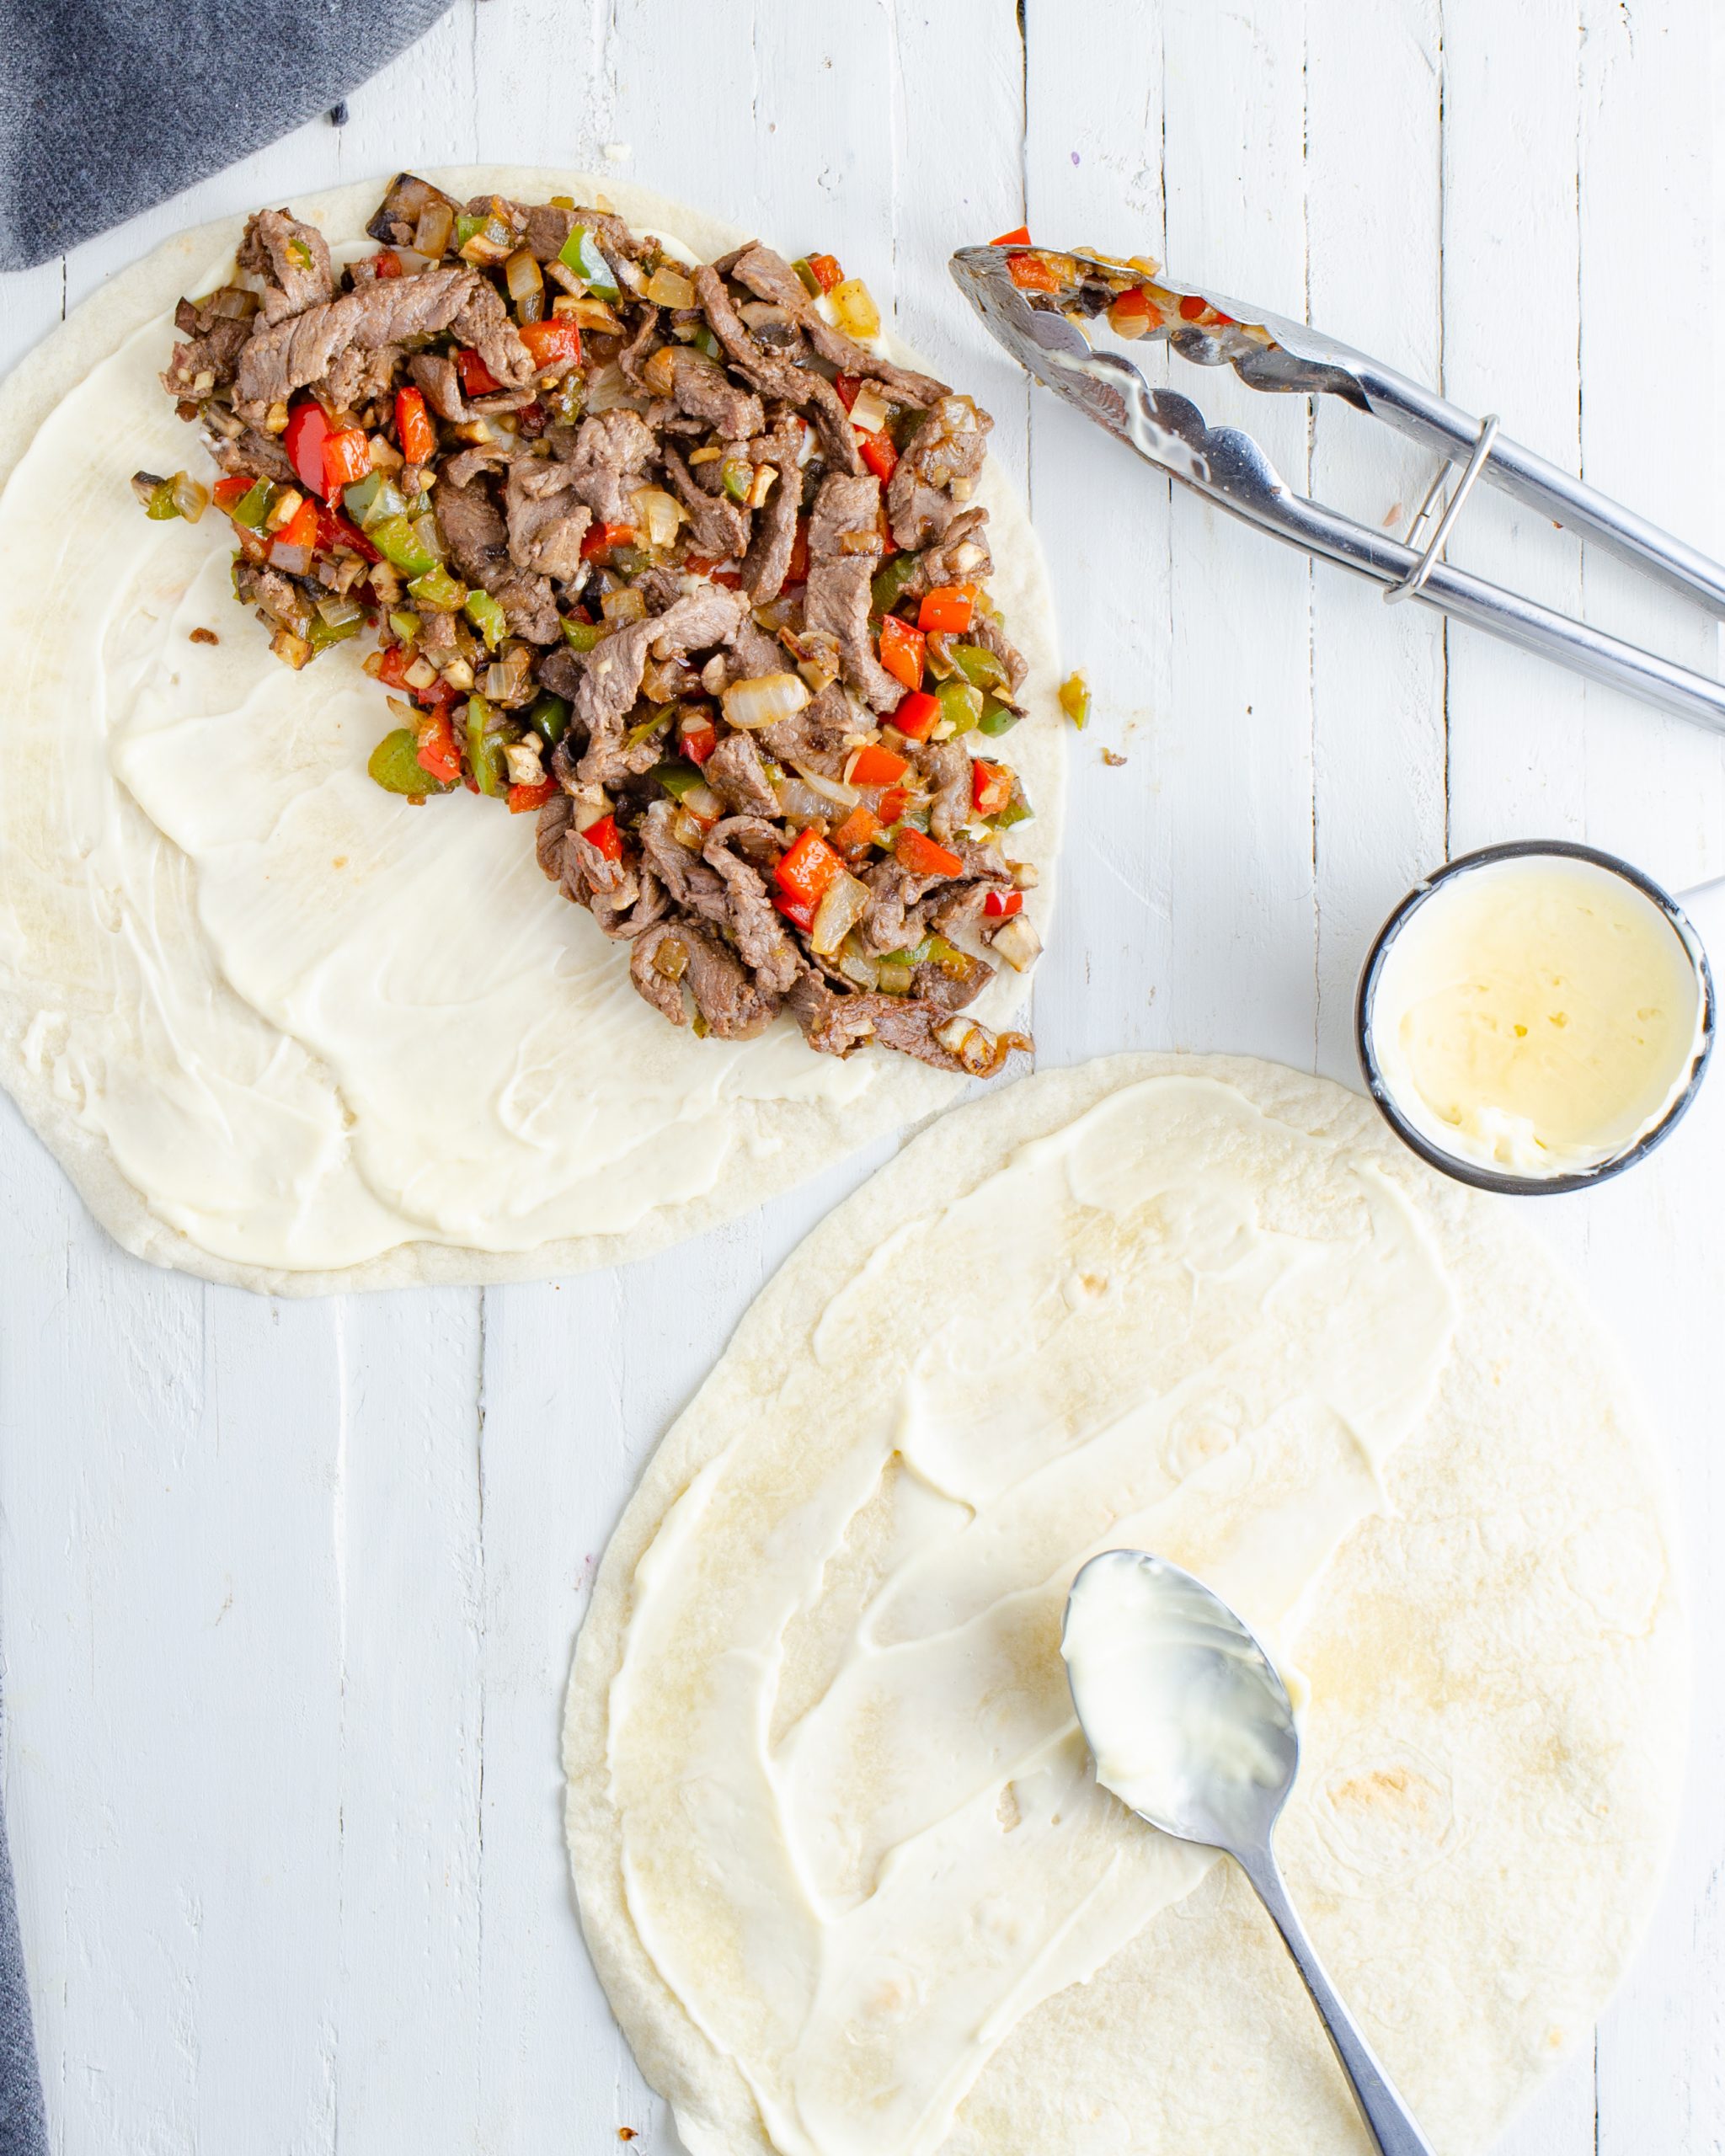 Layer the mayonnaise on the tortillas, and then place the filling mixture on one side of each tortilla. 